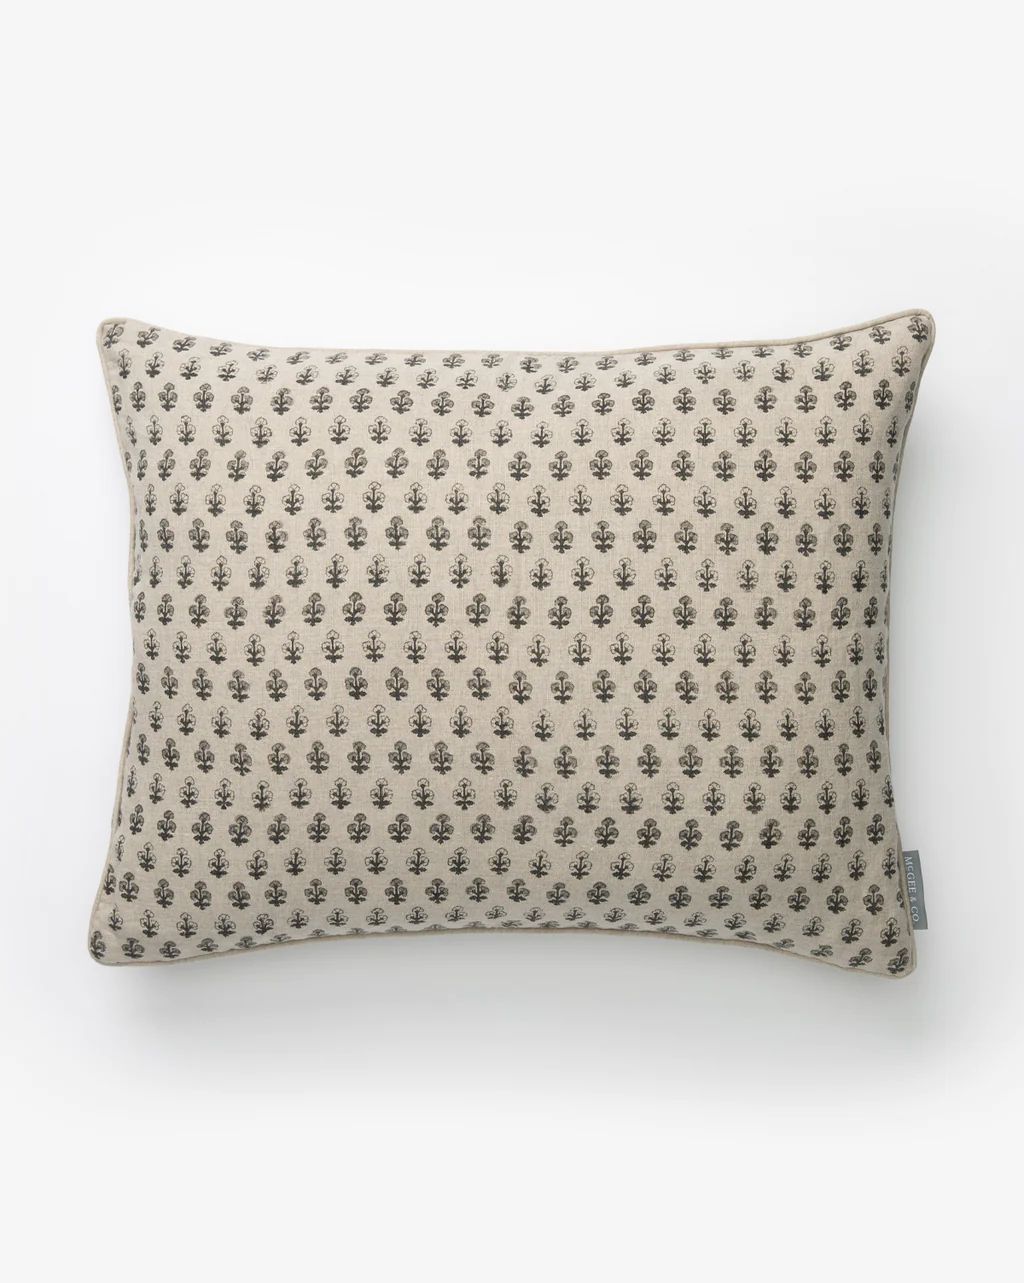 Downing Pillow Cover | McGee & Co.